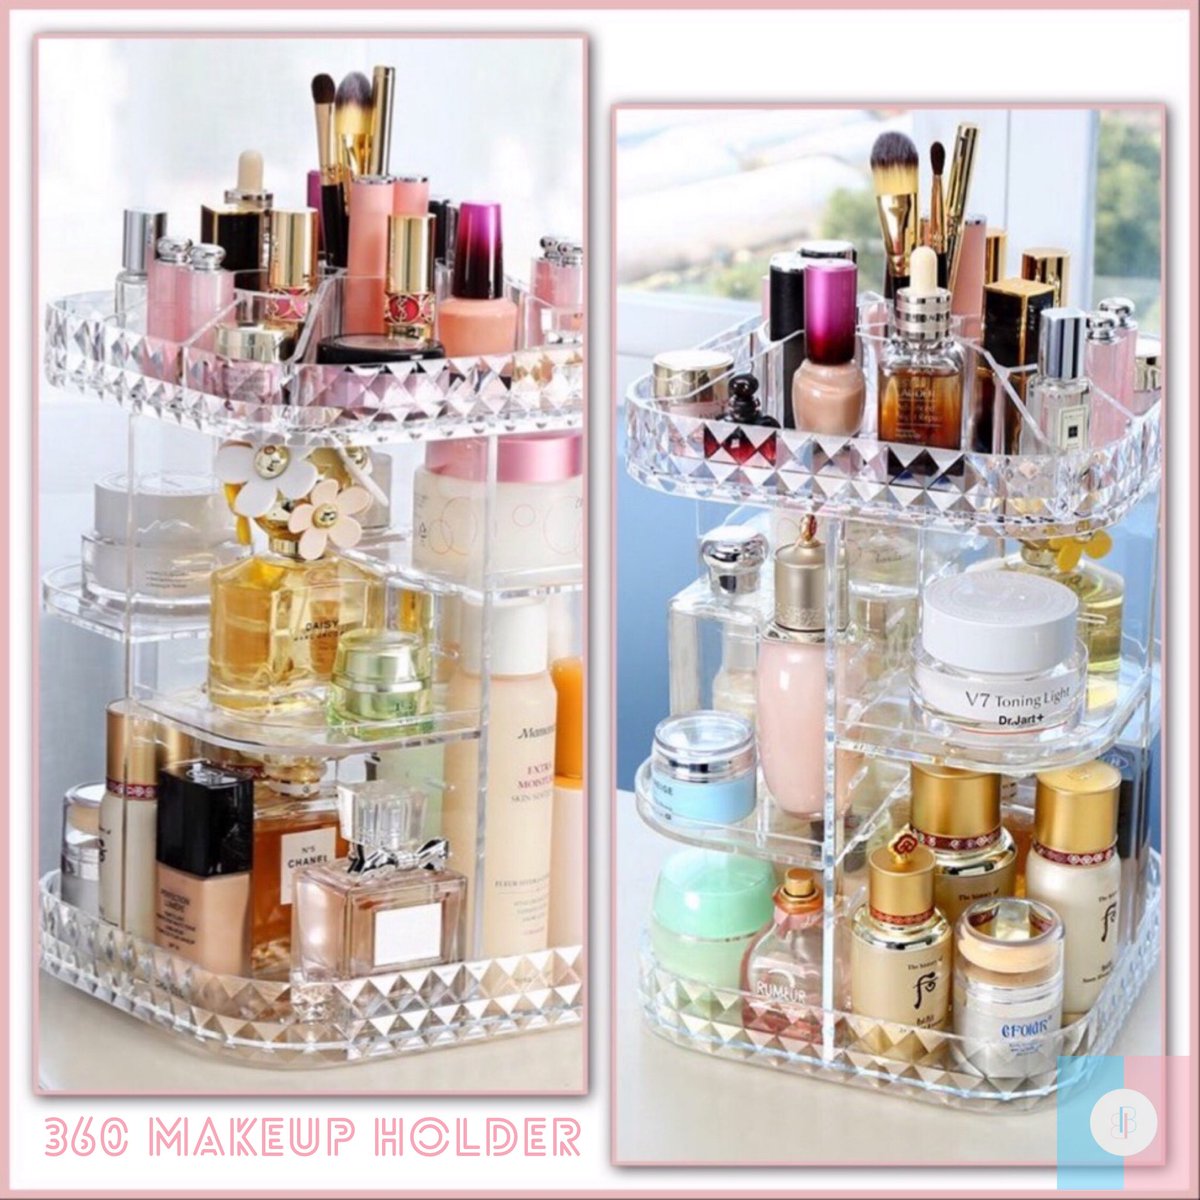 Our 360 Rotating Organizer de-clutters your dresser and makes it easy to find all of your make-up! 

bellatechnica.com/products/360-m…

✨ #makeuporganizer
👸🏻 #yourbeautyrevealed